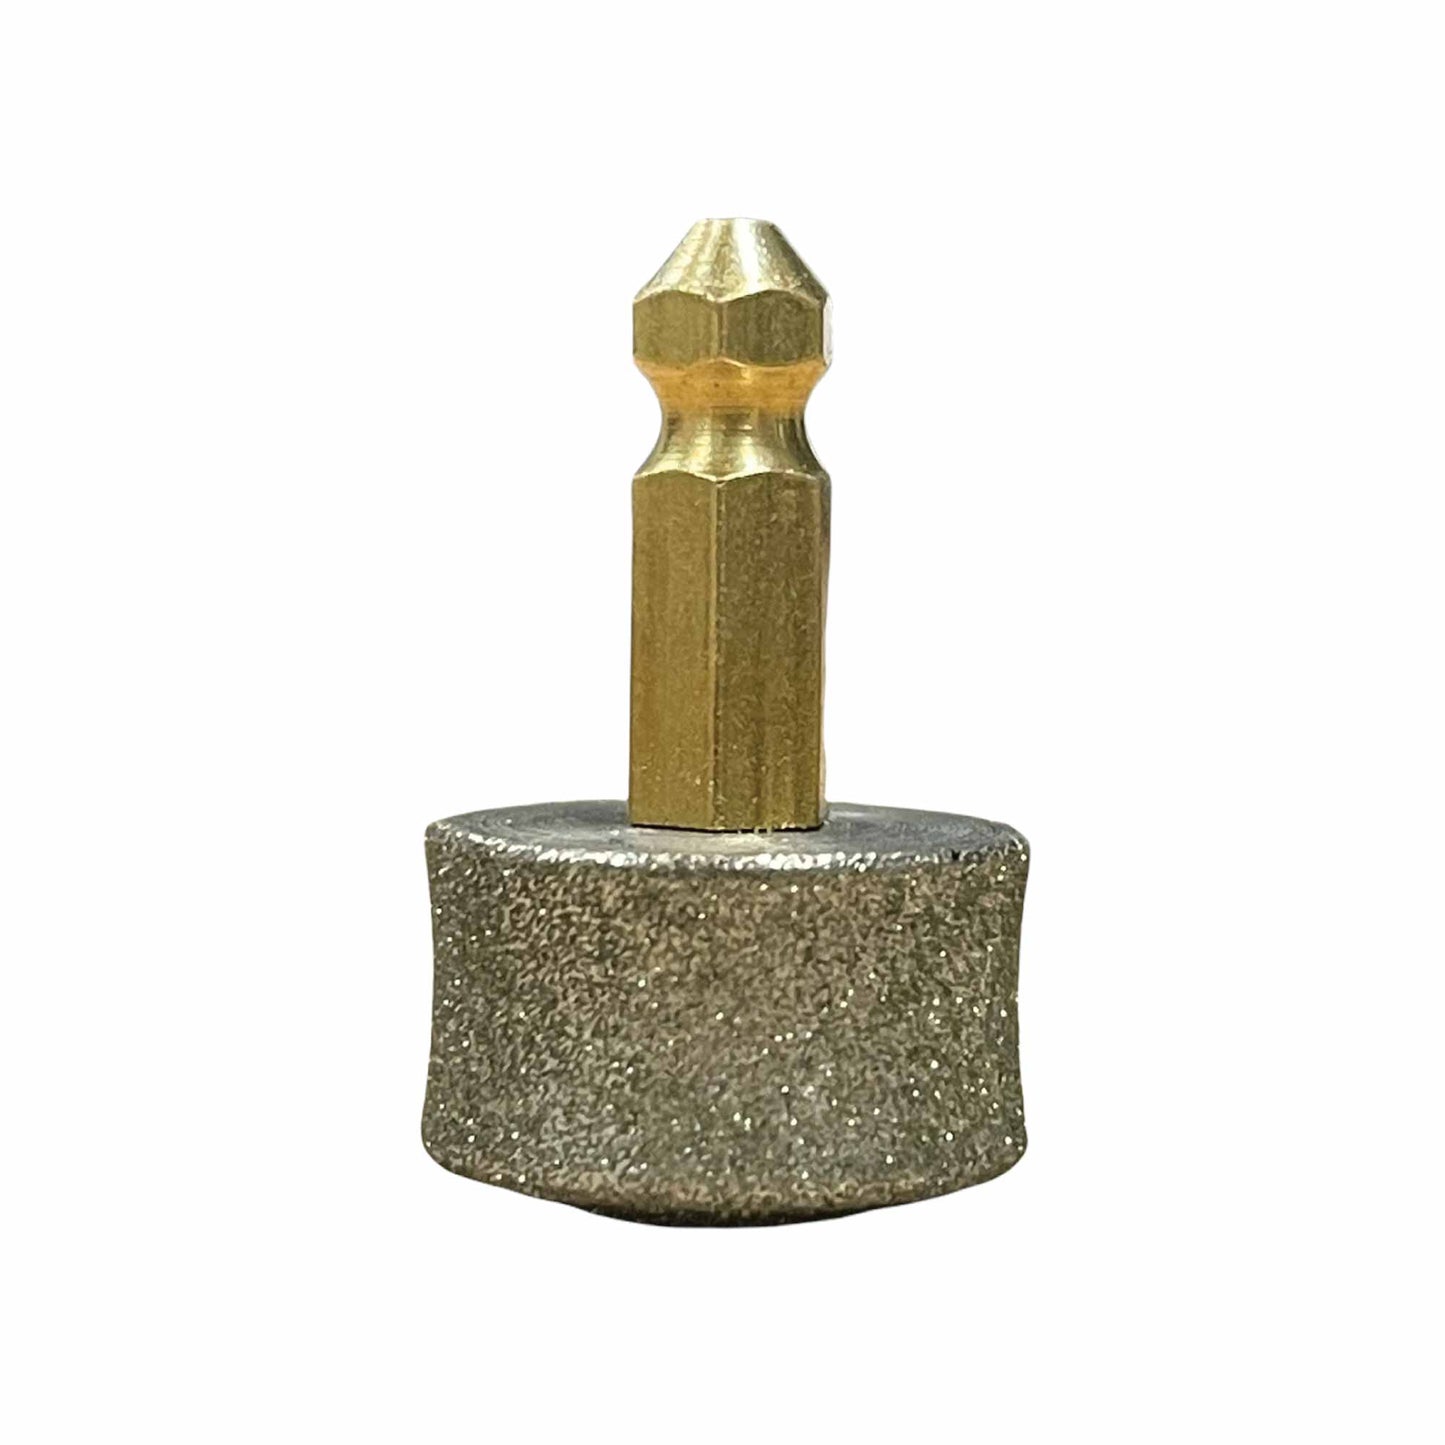 Pet Nail Grinder Head Smooth Filing Replacement Diamond Wheel For Dog Trimmer